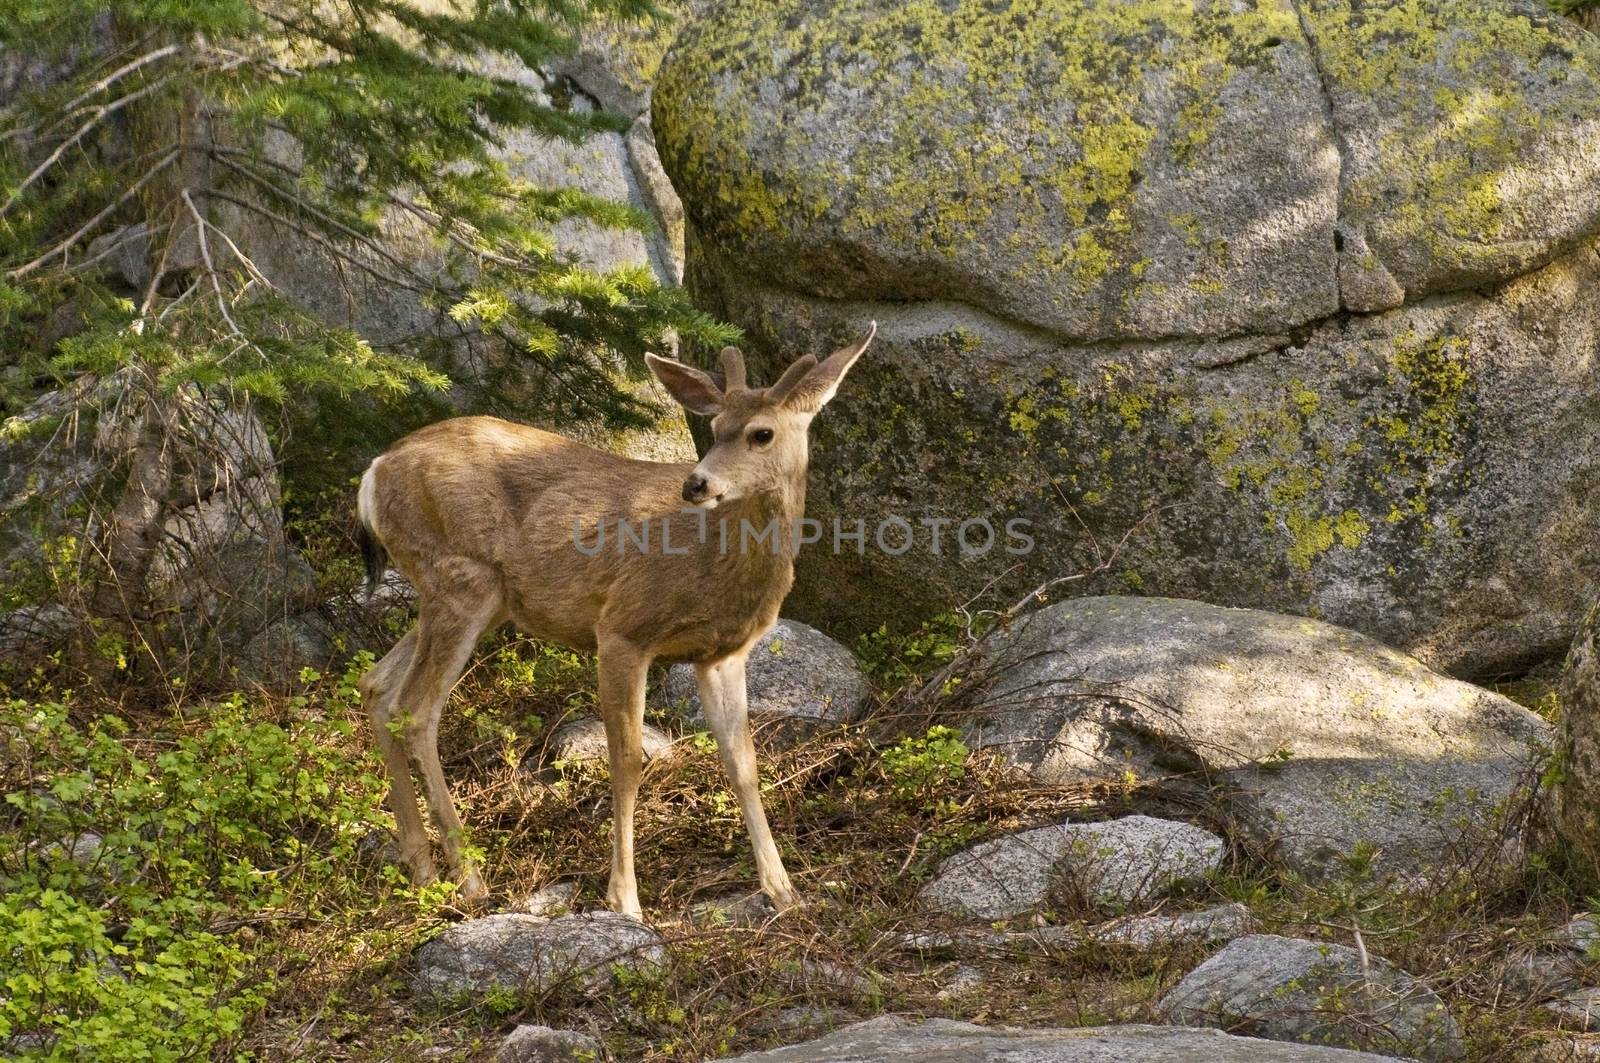 Mule Deer at Lodgepole campground in Sequoia, CA